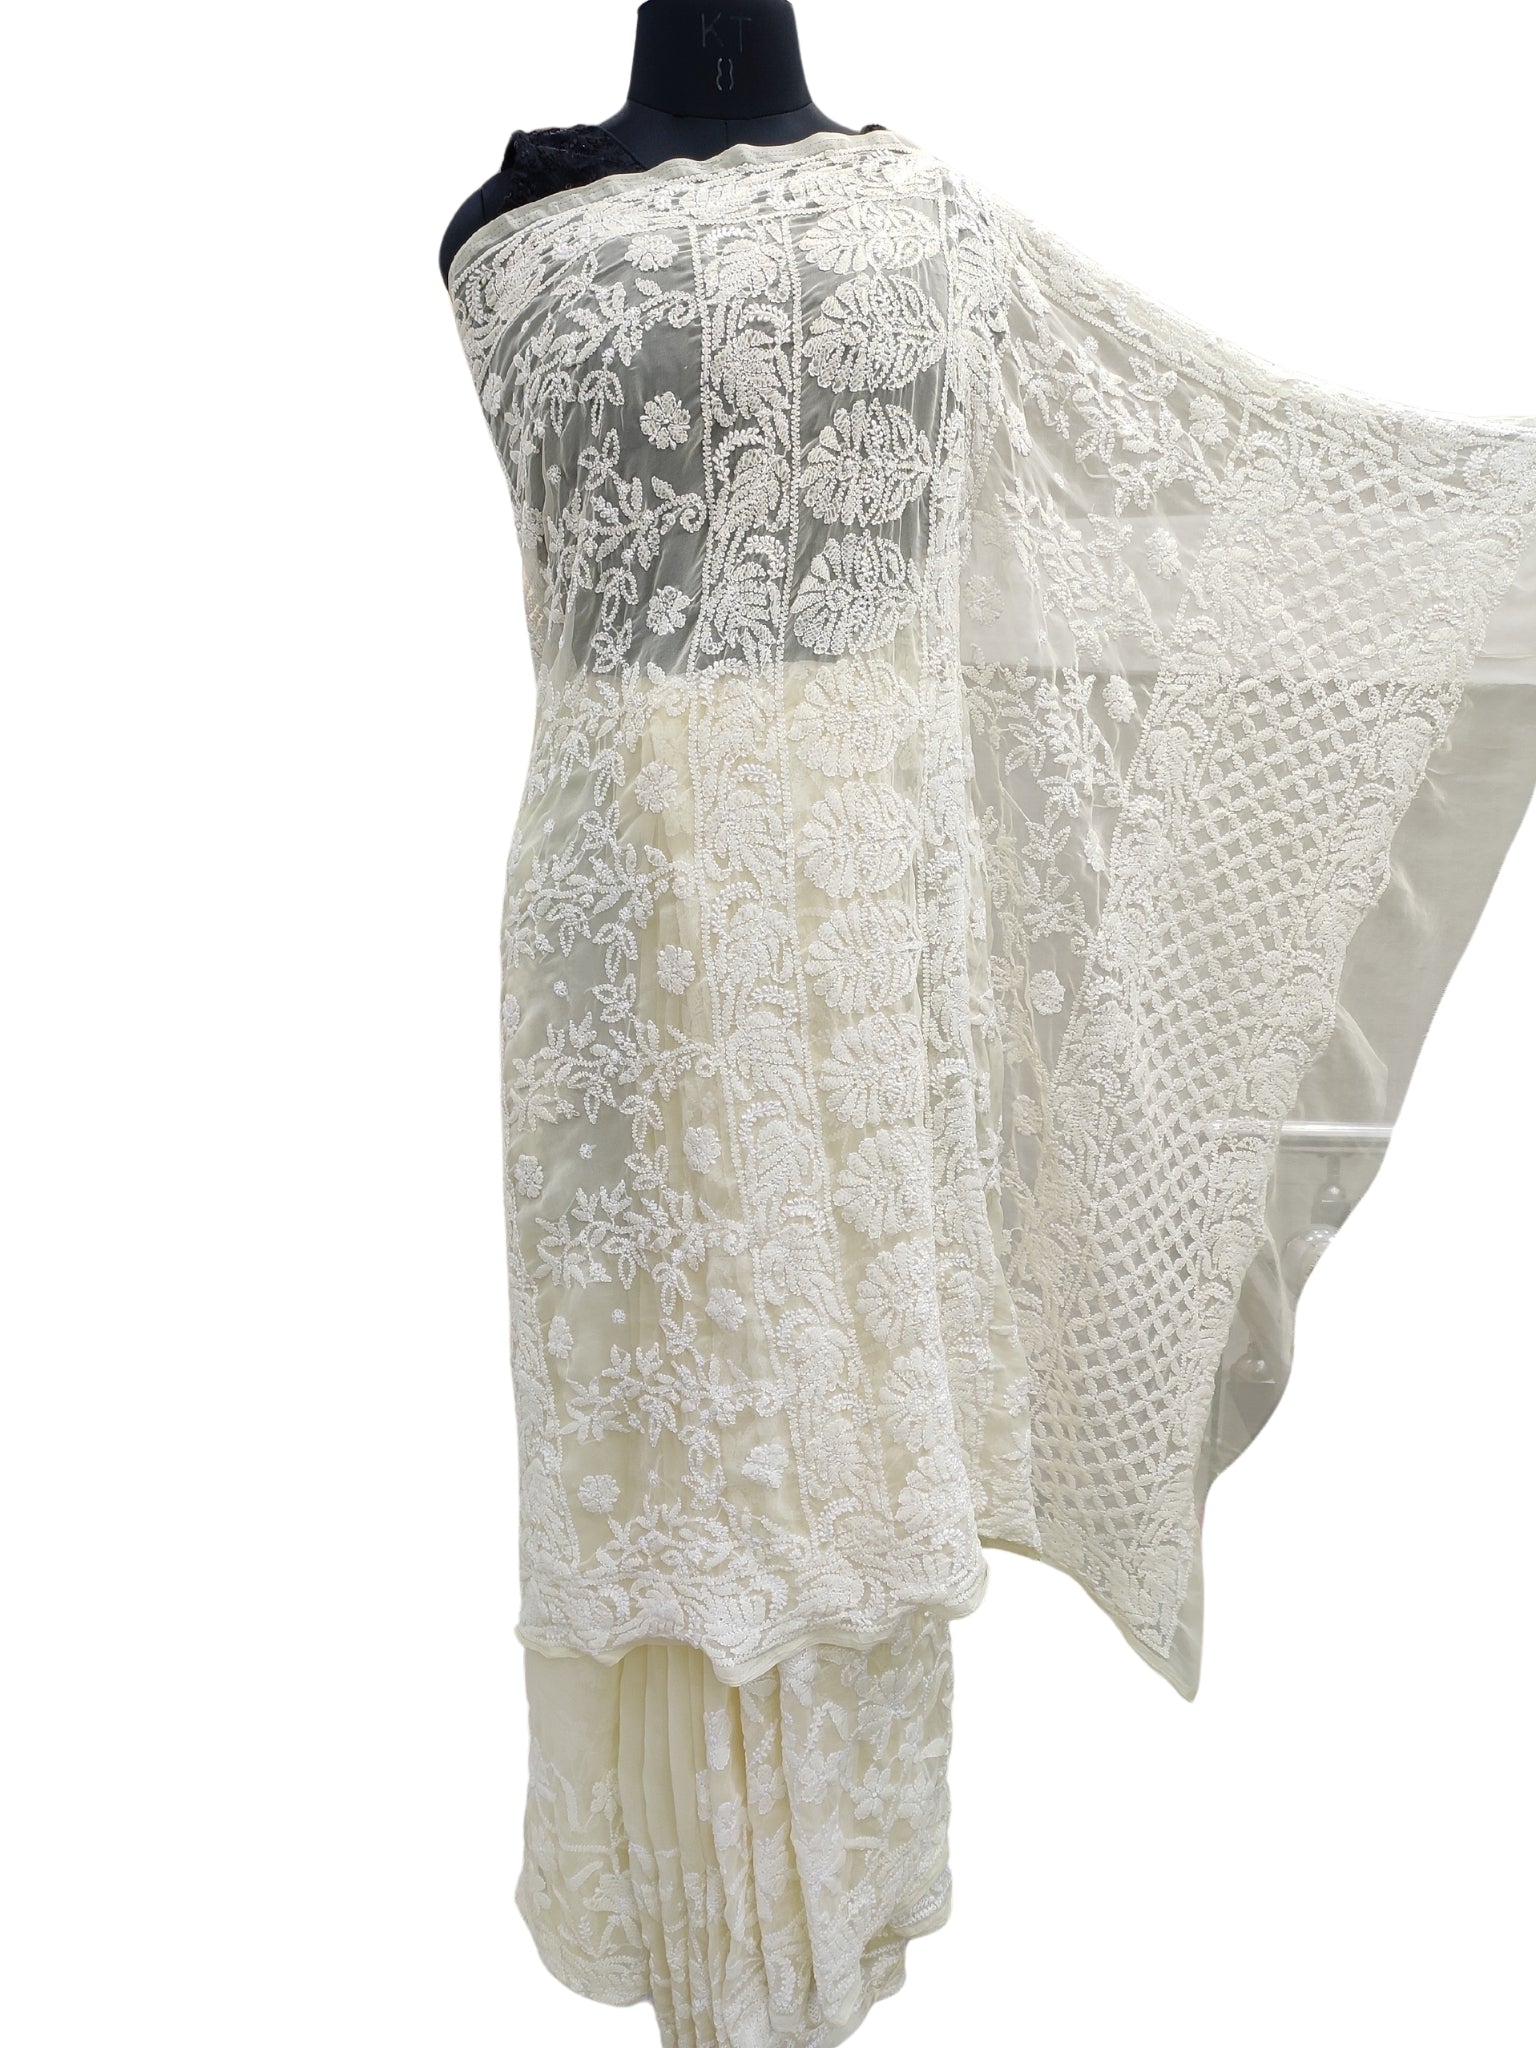 Shyamal Chikan Hand Embroidered Lemon Georgette Lucknowi Chikankari Shoulder Jaal Saree With Blouse Piece - S21937